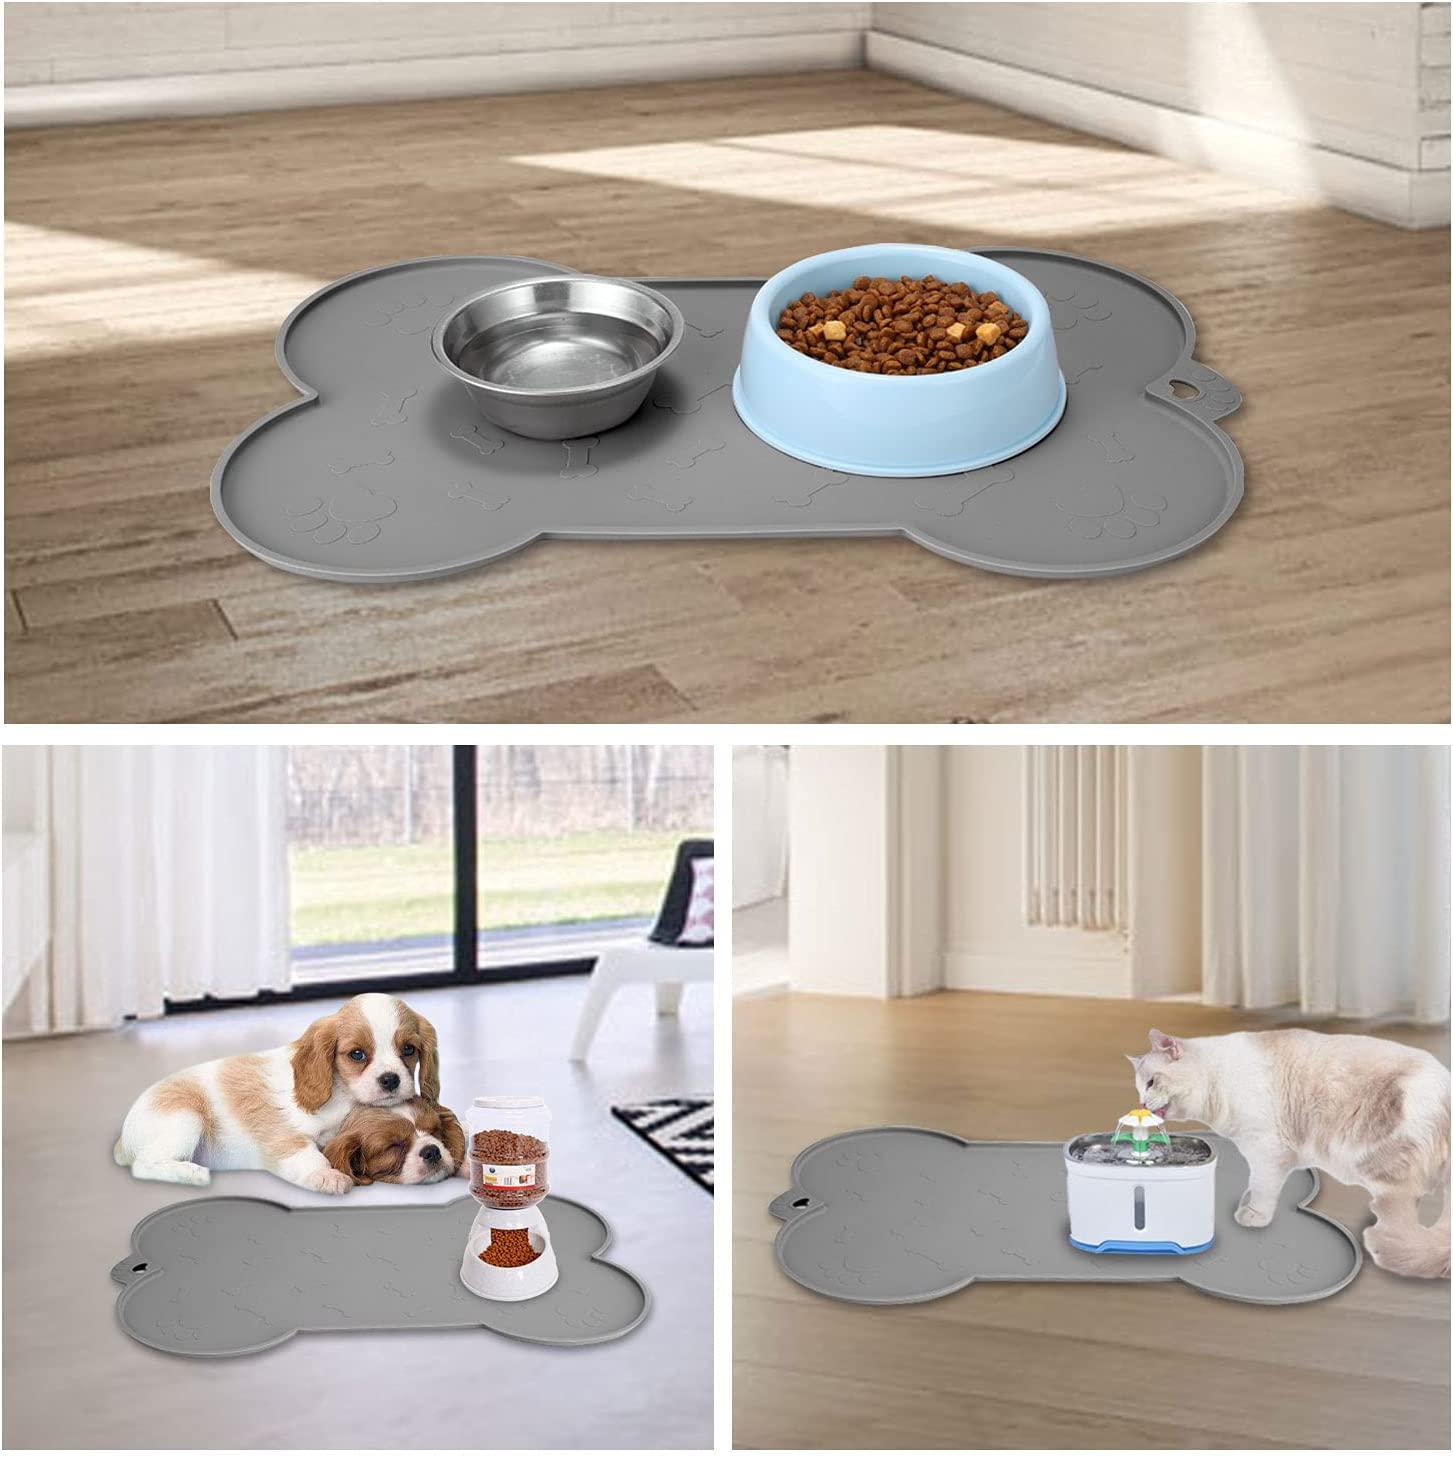 Dog feeding mats for food and water,dog dish mats for floors  waterproof,waterproof floor mat for pets,pet feeding mats for dogs,dog  waterproof mat,silicone dog bowl mat,food mat for cat bowls,pet placemats  for food